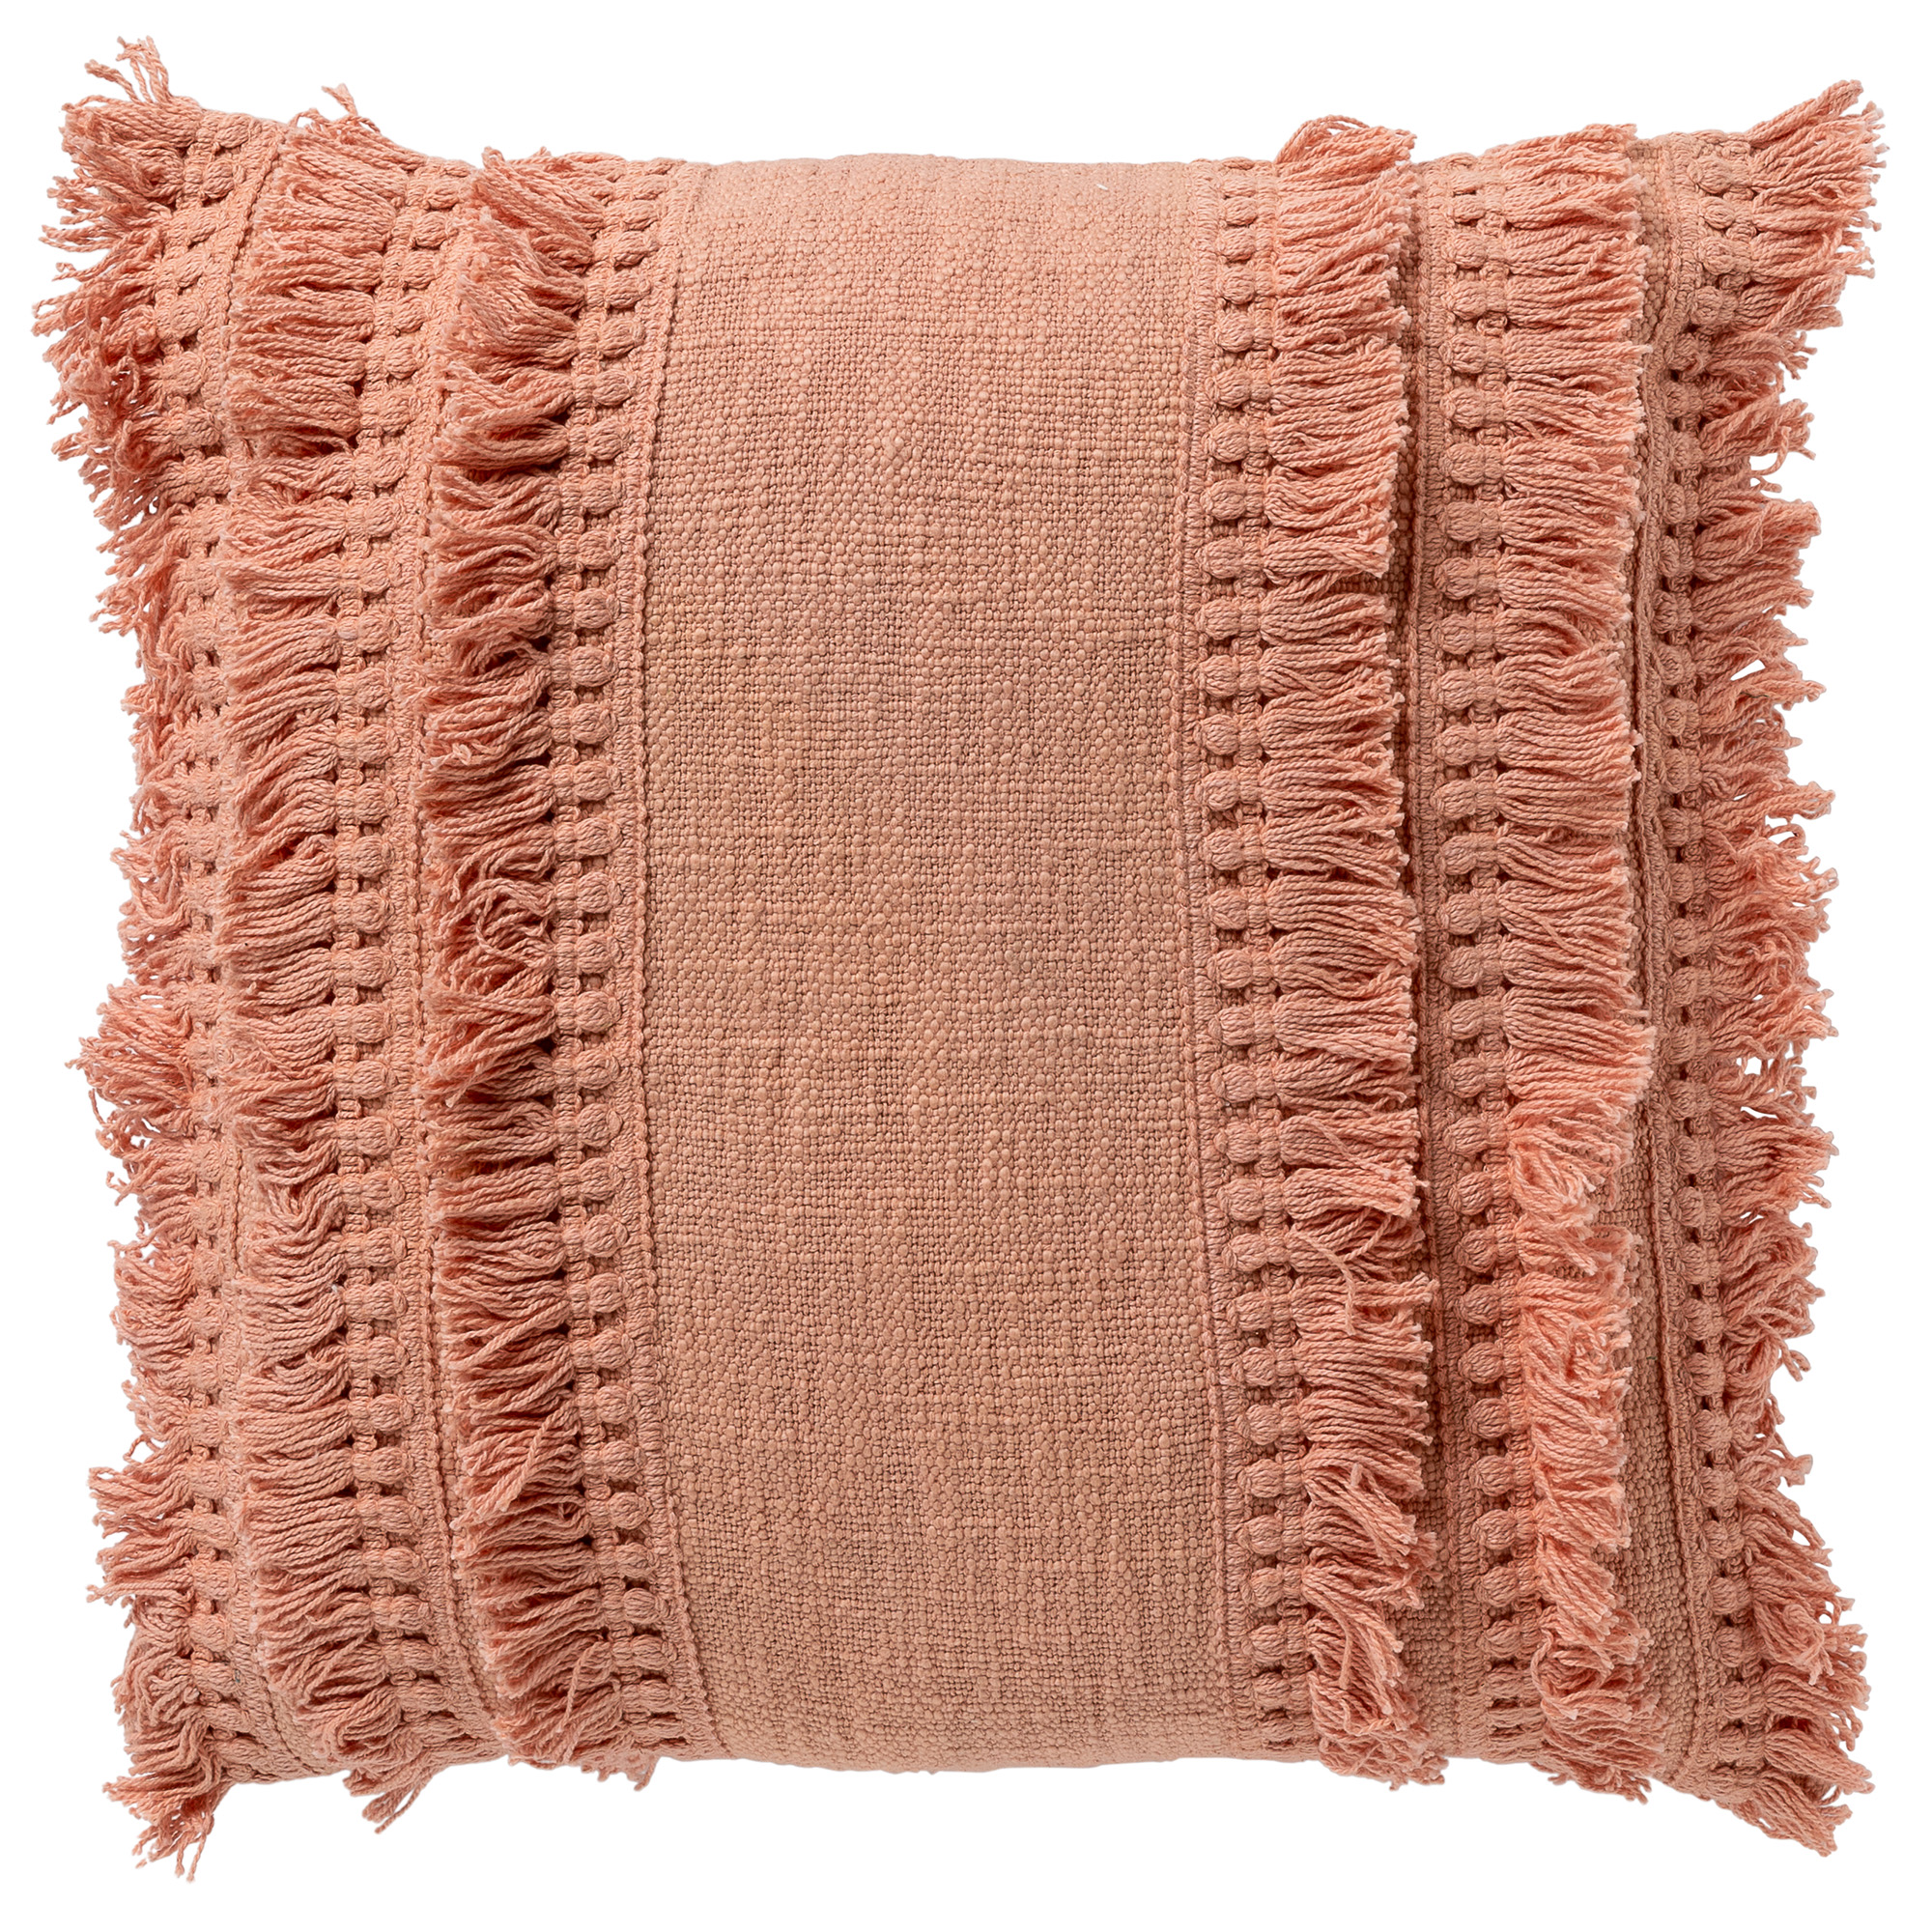 FARA- Kussenhoes 45x45 cm Muted Clay - roze